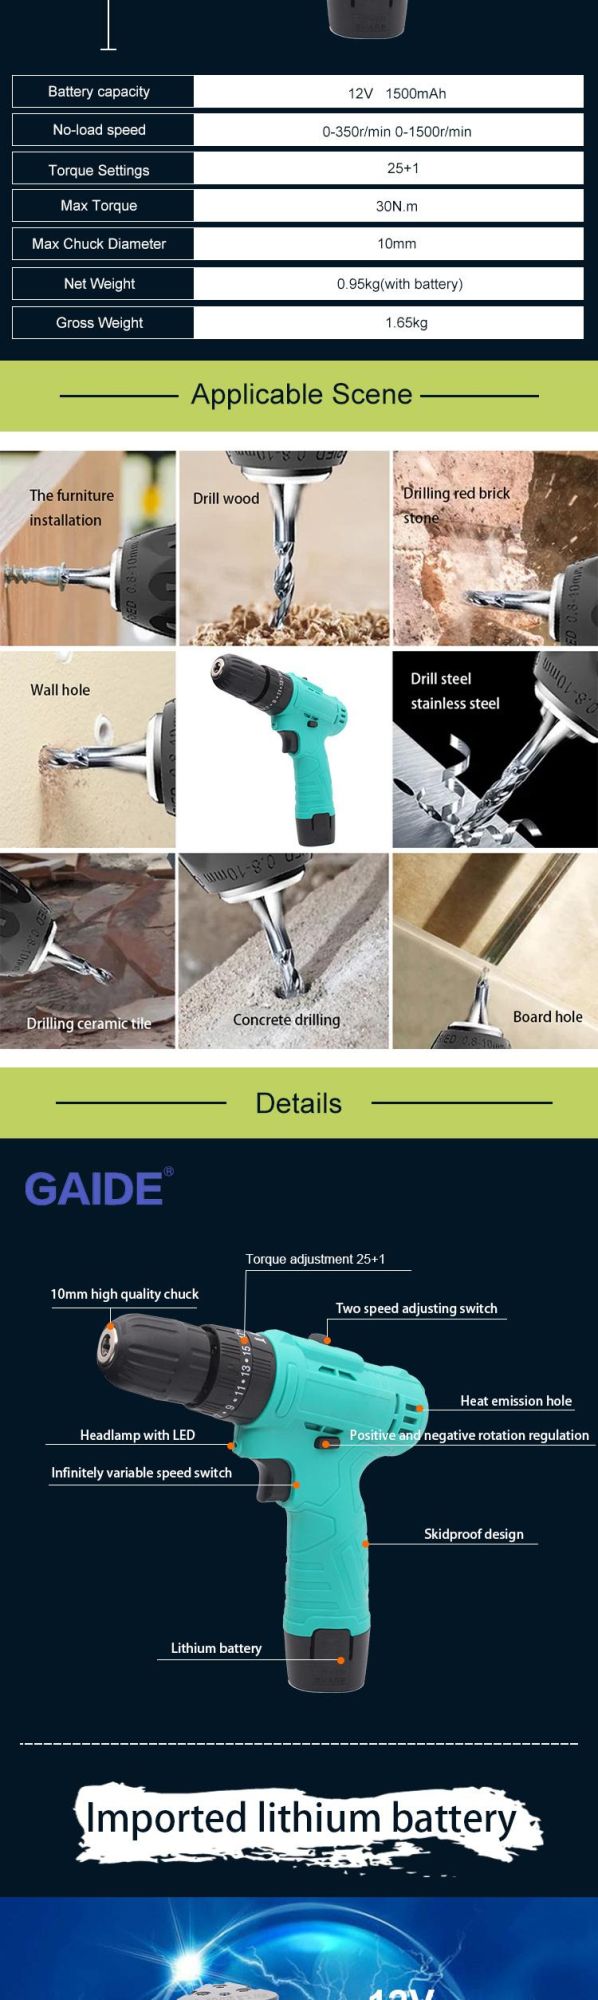 Gaide Concrate Cordless Drill 10mm Dewalit Impact 24V Set